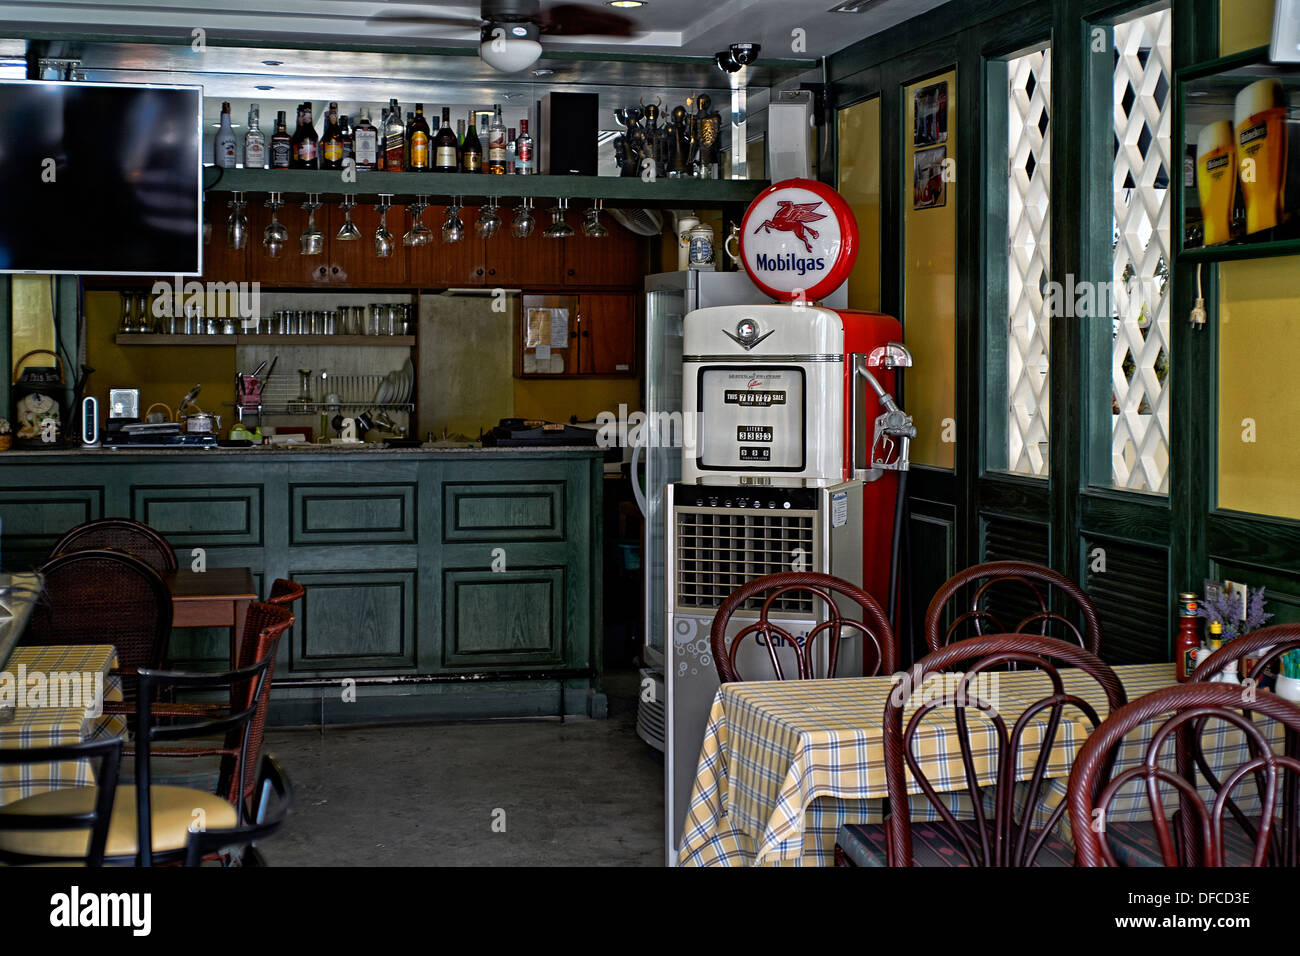 Cafe Interior. Quaint country café with feature Mobile gas petrol pump converted to a cool air dispenser.  England UK Stock Photo